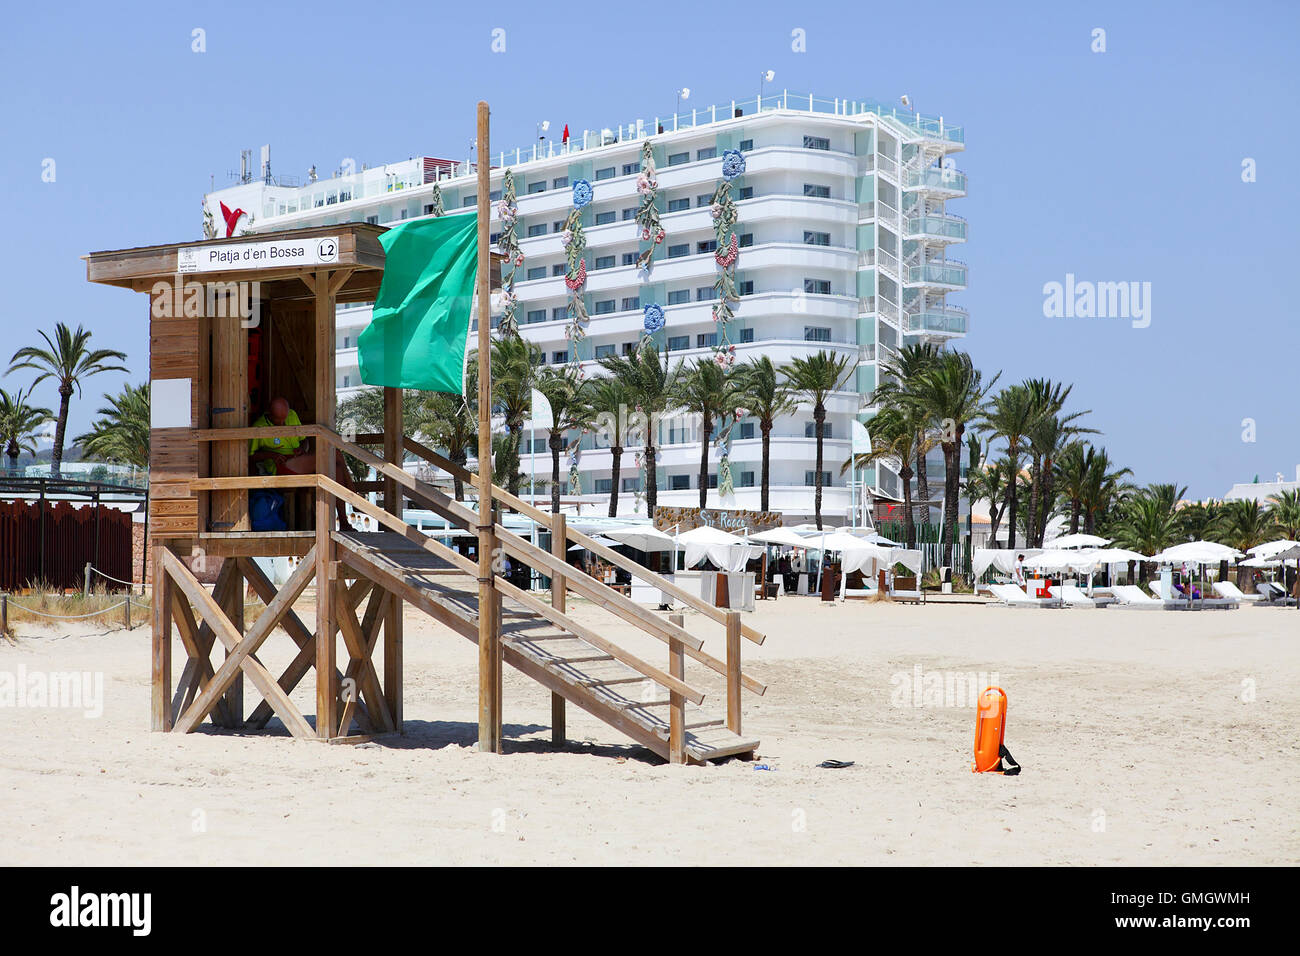 The Ushuaia Hotel at Platja D'en Bossa on the Spanish island of Ibiza. Viewed here from the beach. Stock Photo